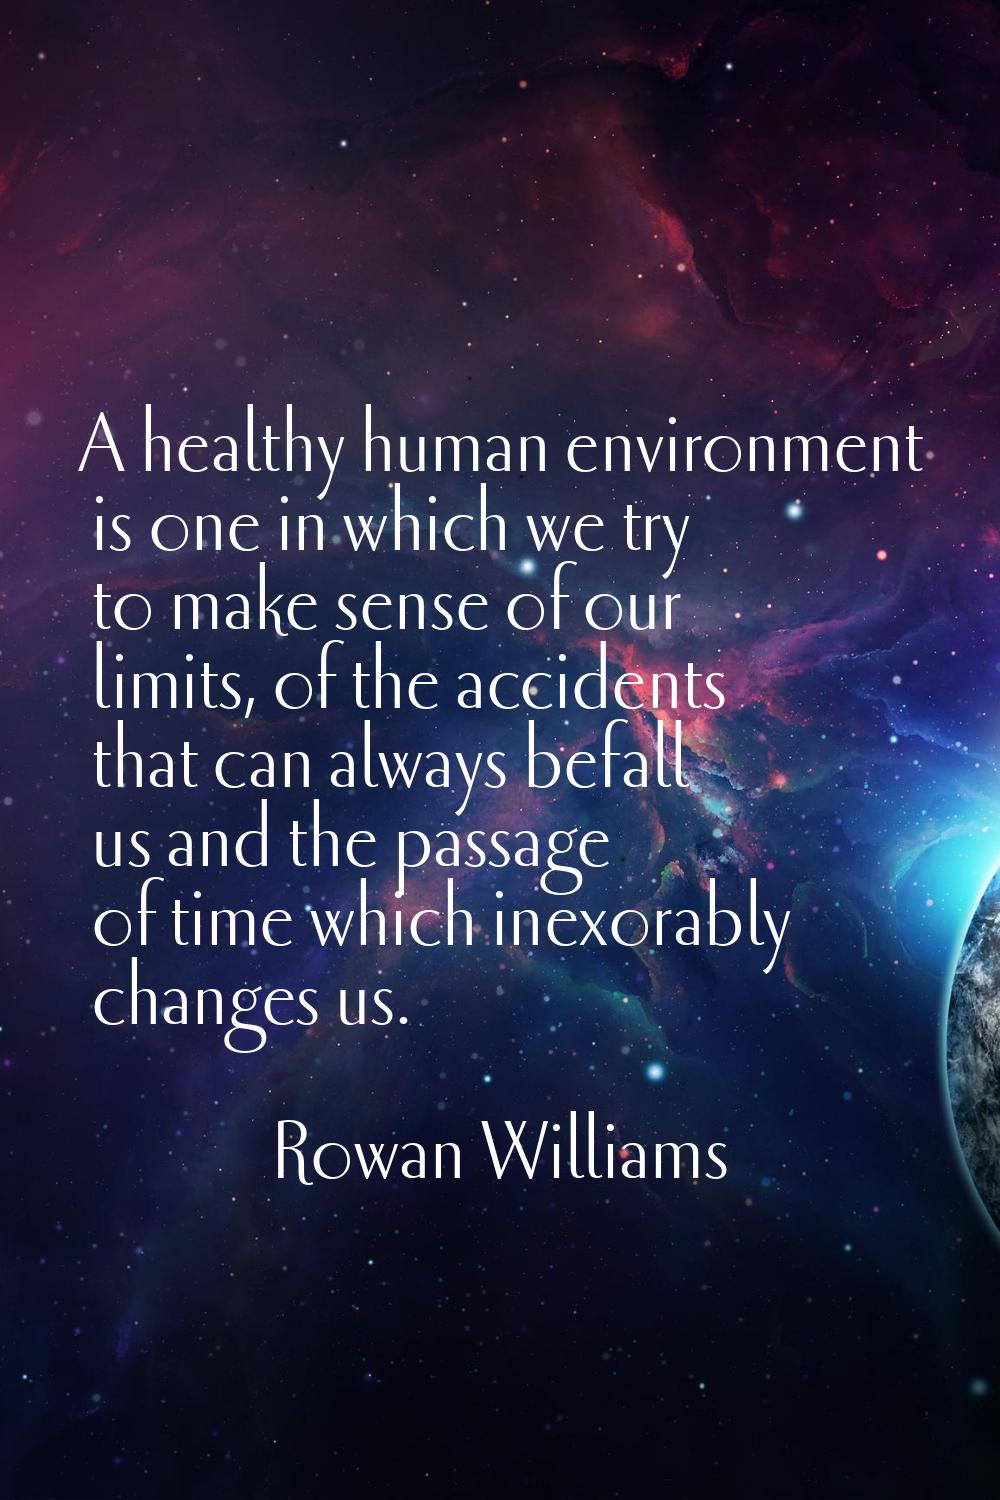 A healthy human environment is one in which we try to make sense of our limits, of the accidents th